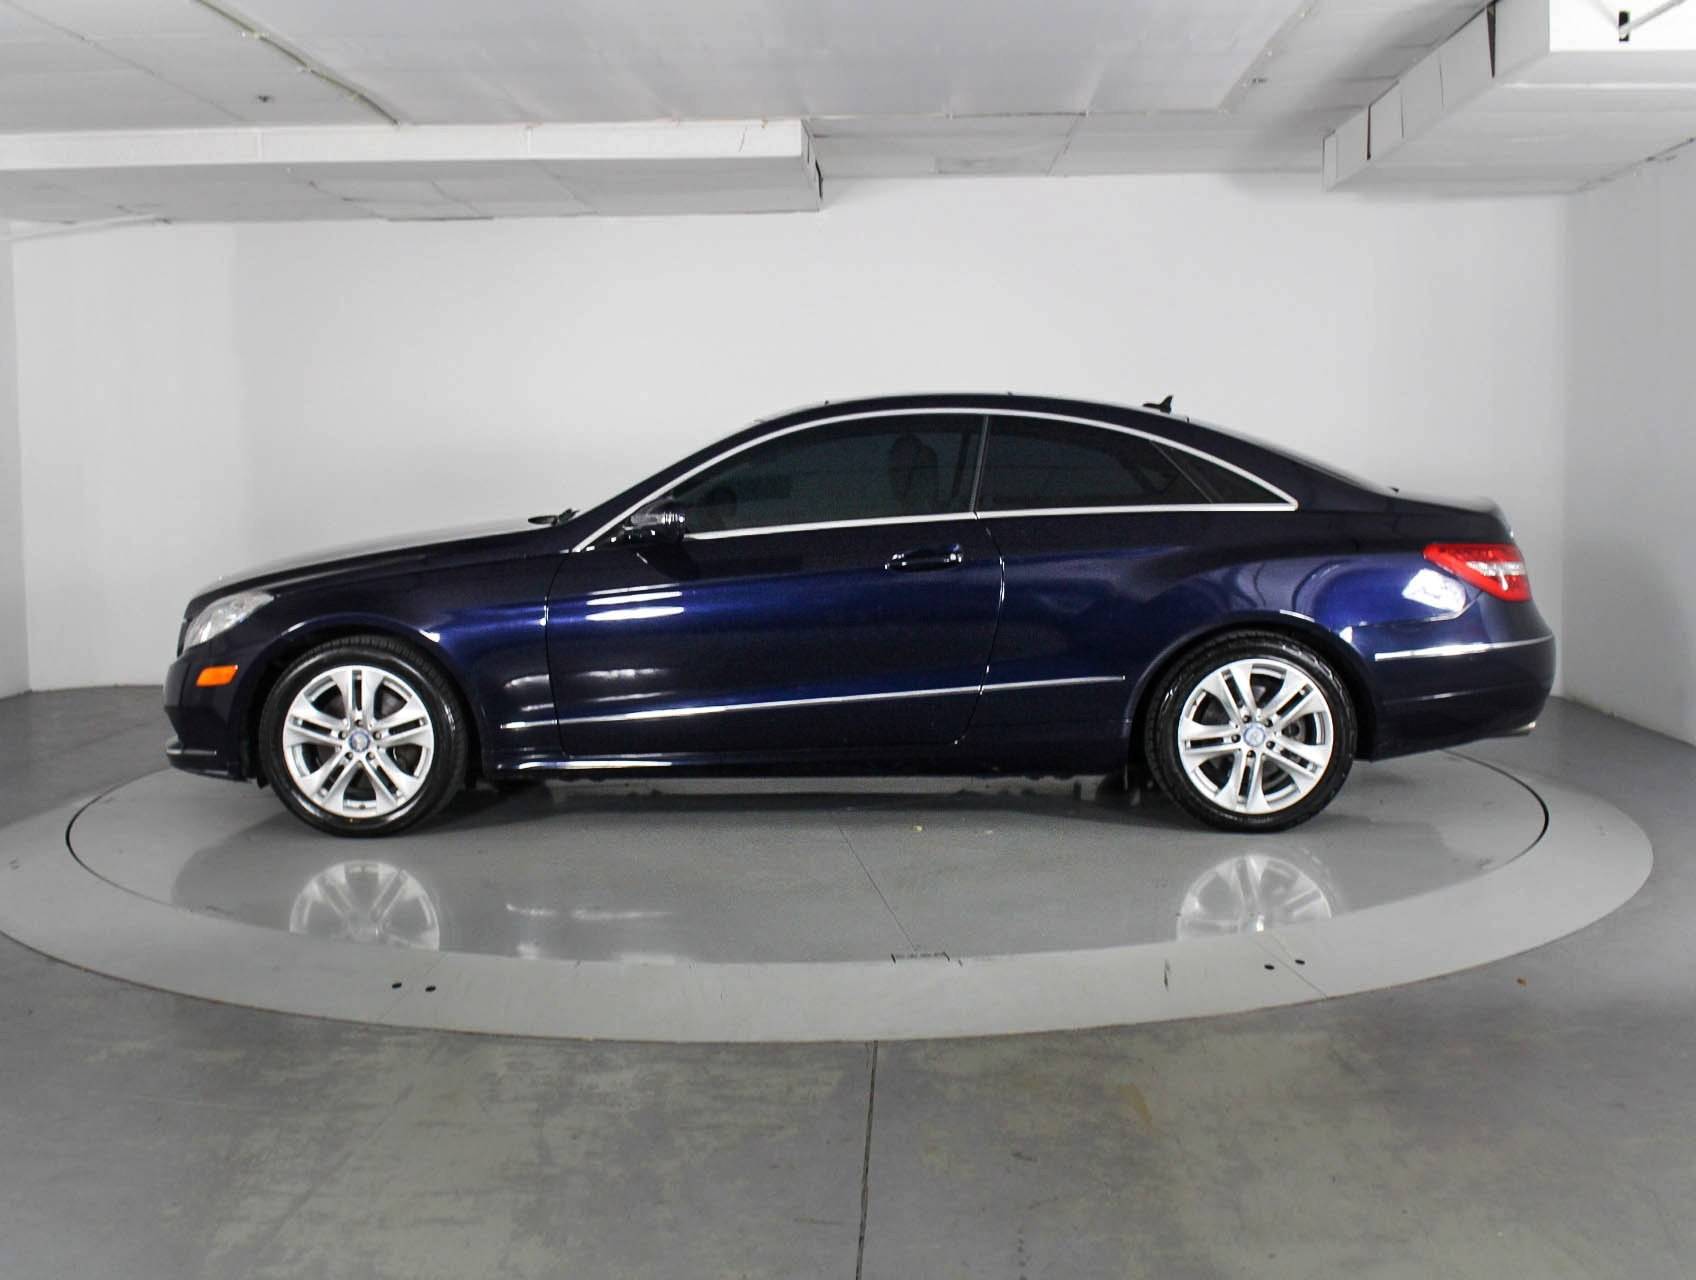 Used 10 Mercedes Benz E Class 50 Coupe For Sale In Hollywood Fl 858 Florida Fine Cars